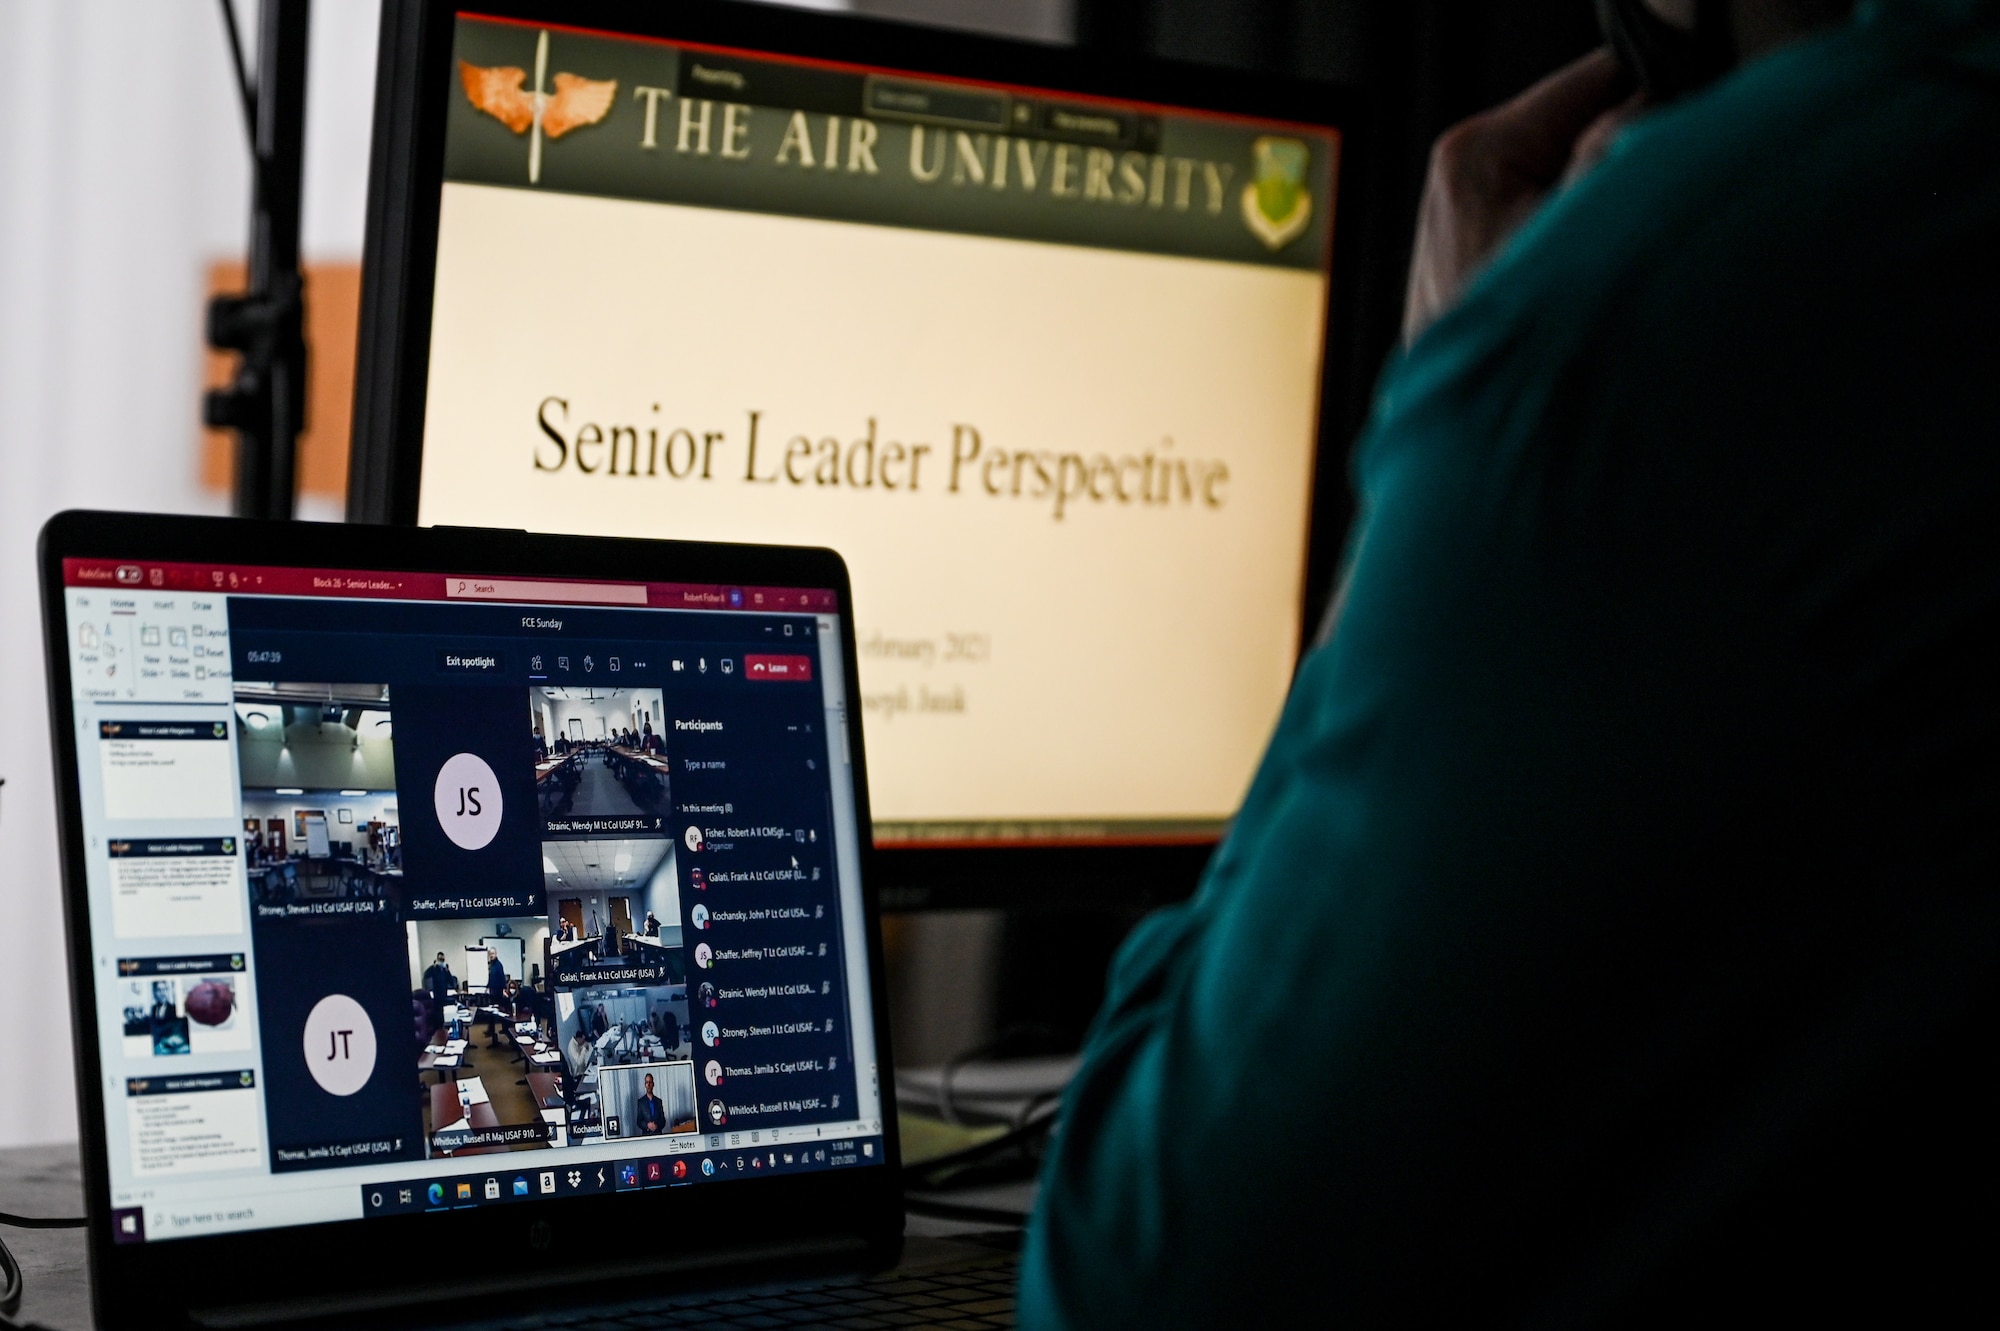 The 910th AW held its third annual Air University FCE course in a sub-virtual format this year, Feb. 18-21, mixing small group in-person discussion and large group virtual learning to efficiently balance a personable learning environment and COVID-19 risk mitigation.